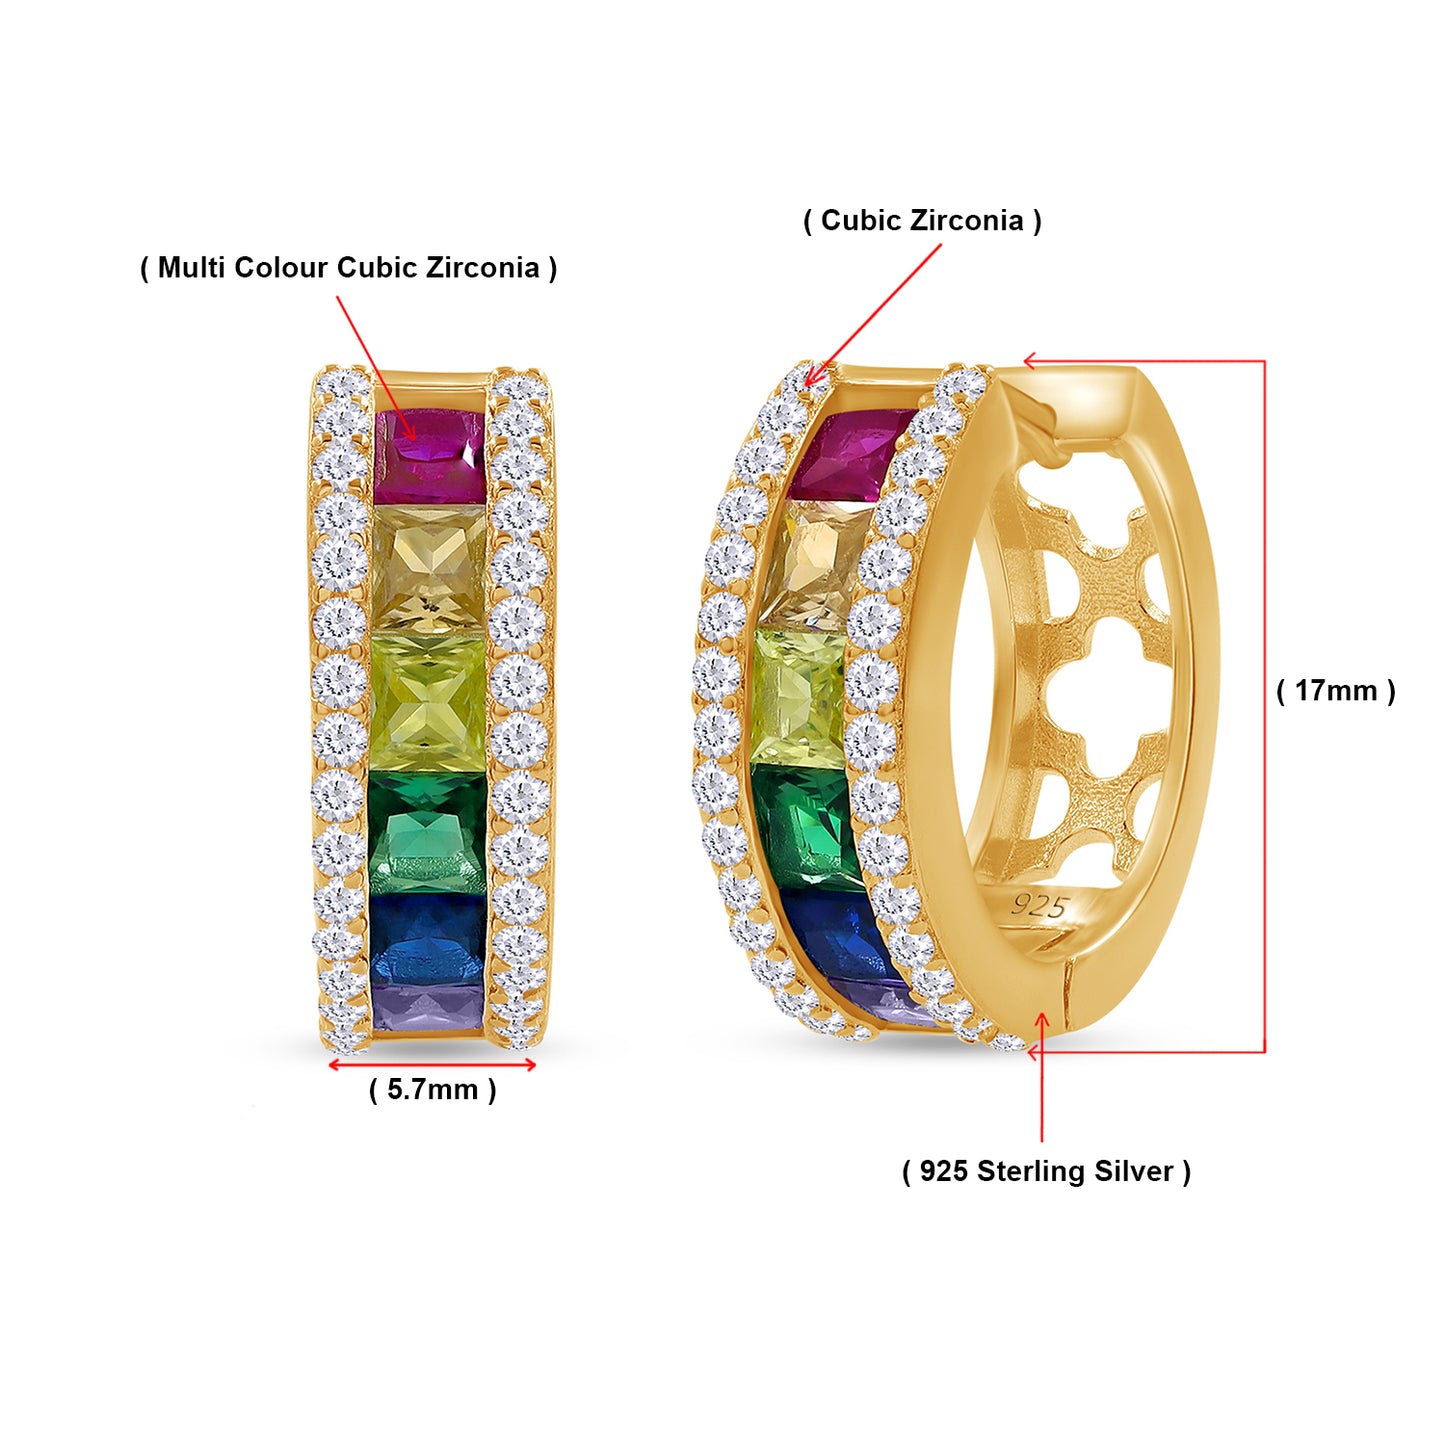 Load image into Gallery viewer, Rainbow Hoop Earrings for Women, 14K Gold Plated 925 Sterling Silver Multi-Color Cubic Zirconia Round Huggie Earrings, Hypoallergenic Earrings Jewelry Gifts
